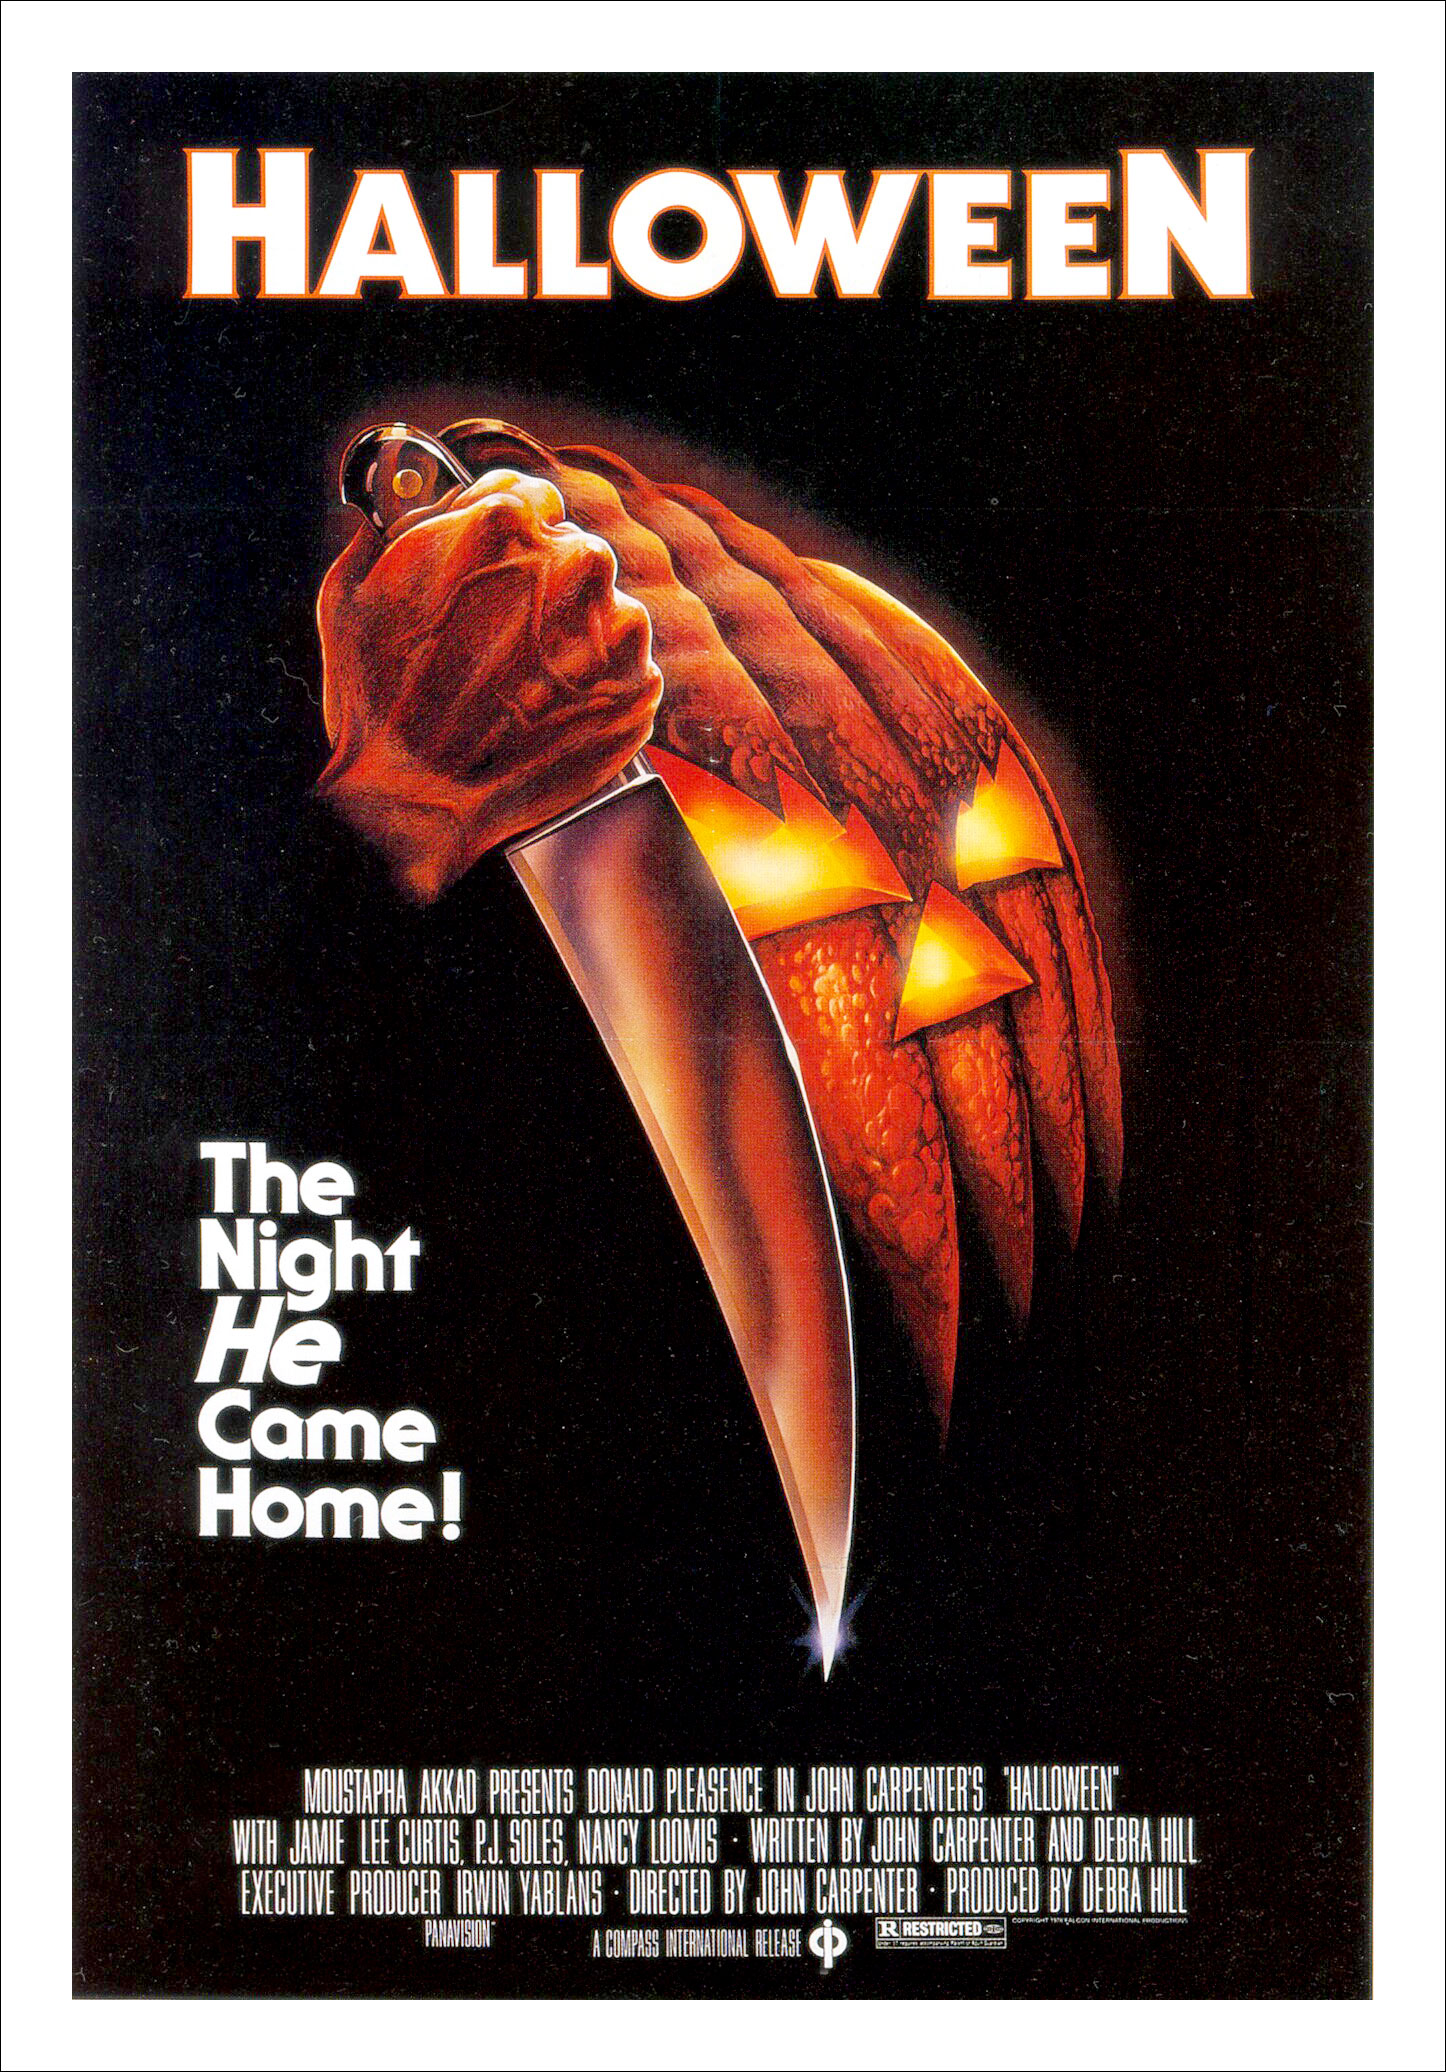 Halloween (1978) Backgrounds, Compatible - PC, Mobile, Gadgets| 1446x2072 px